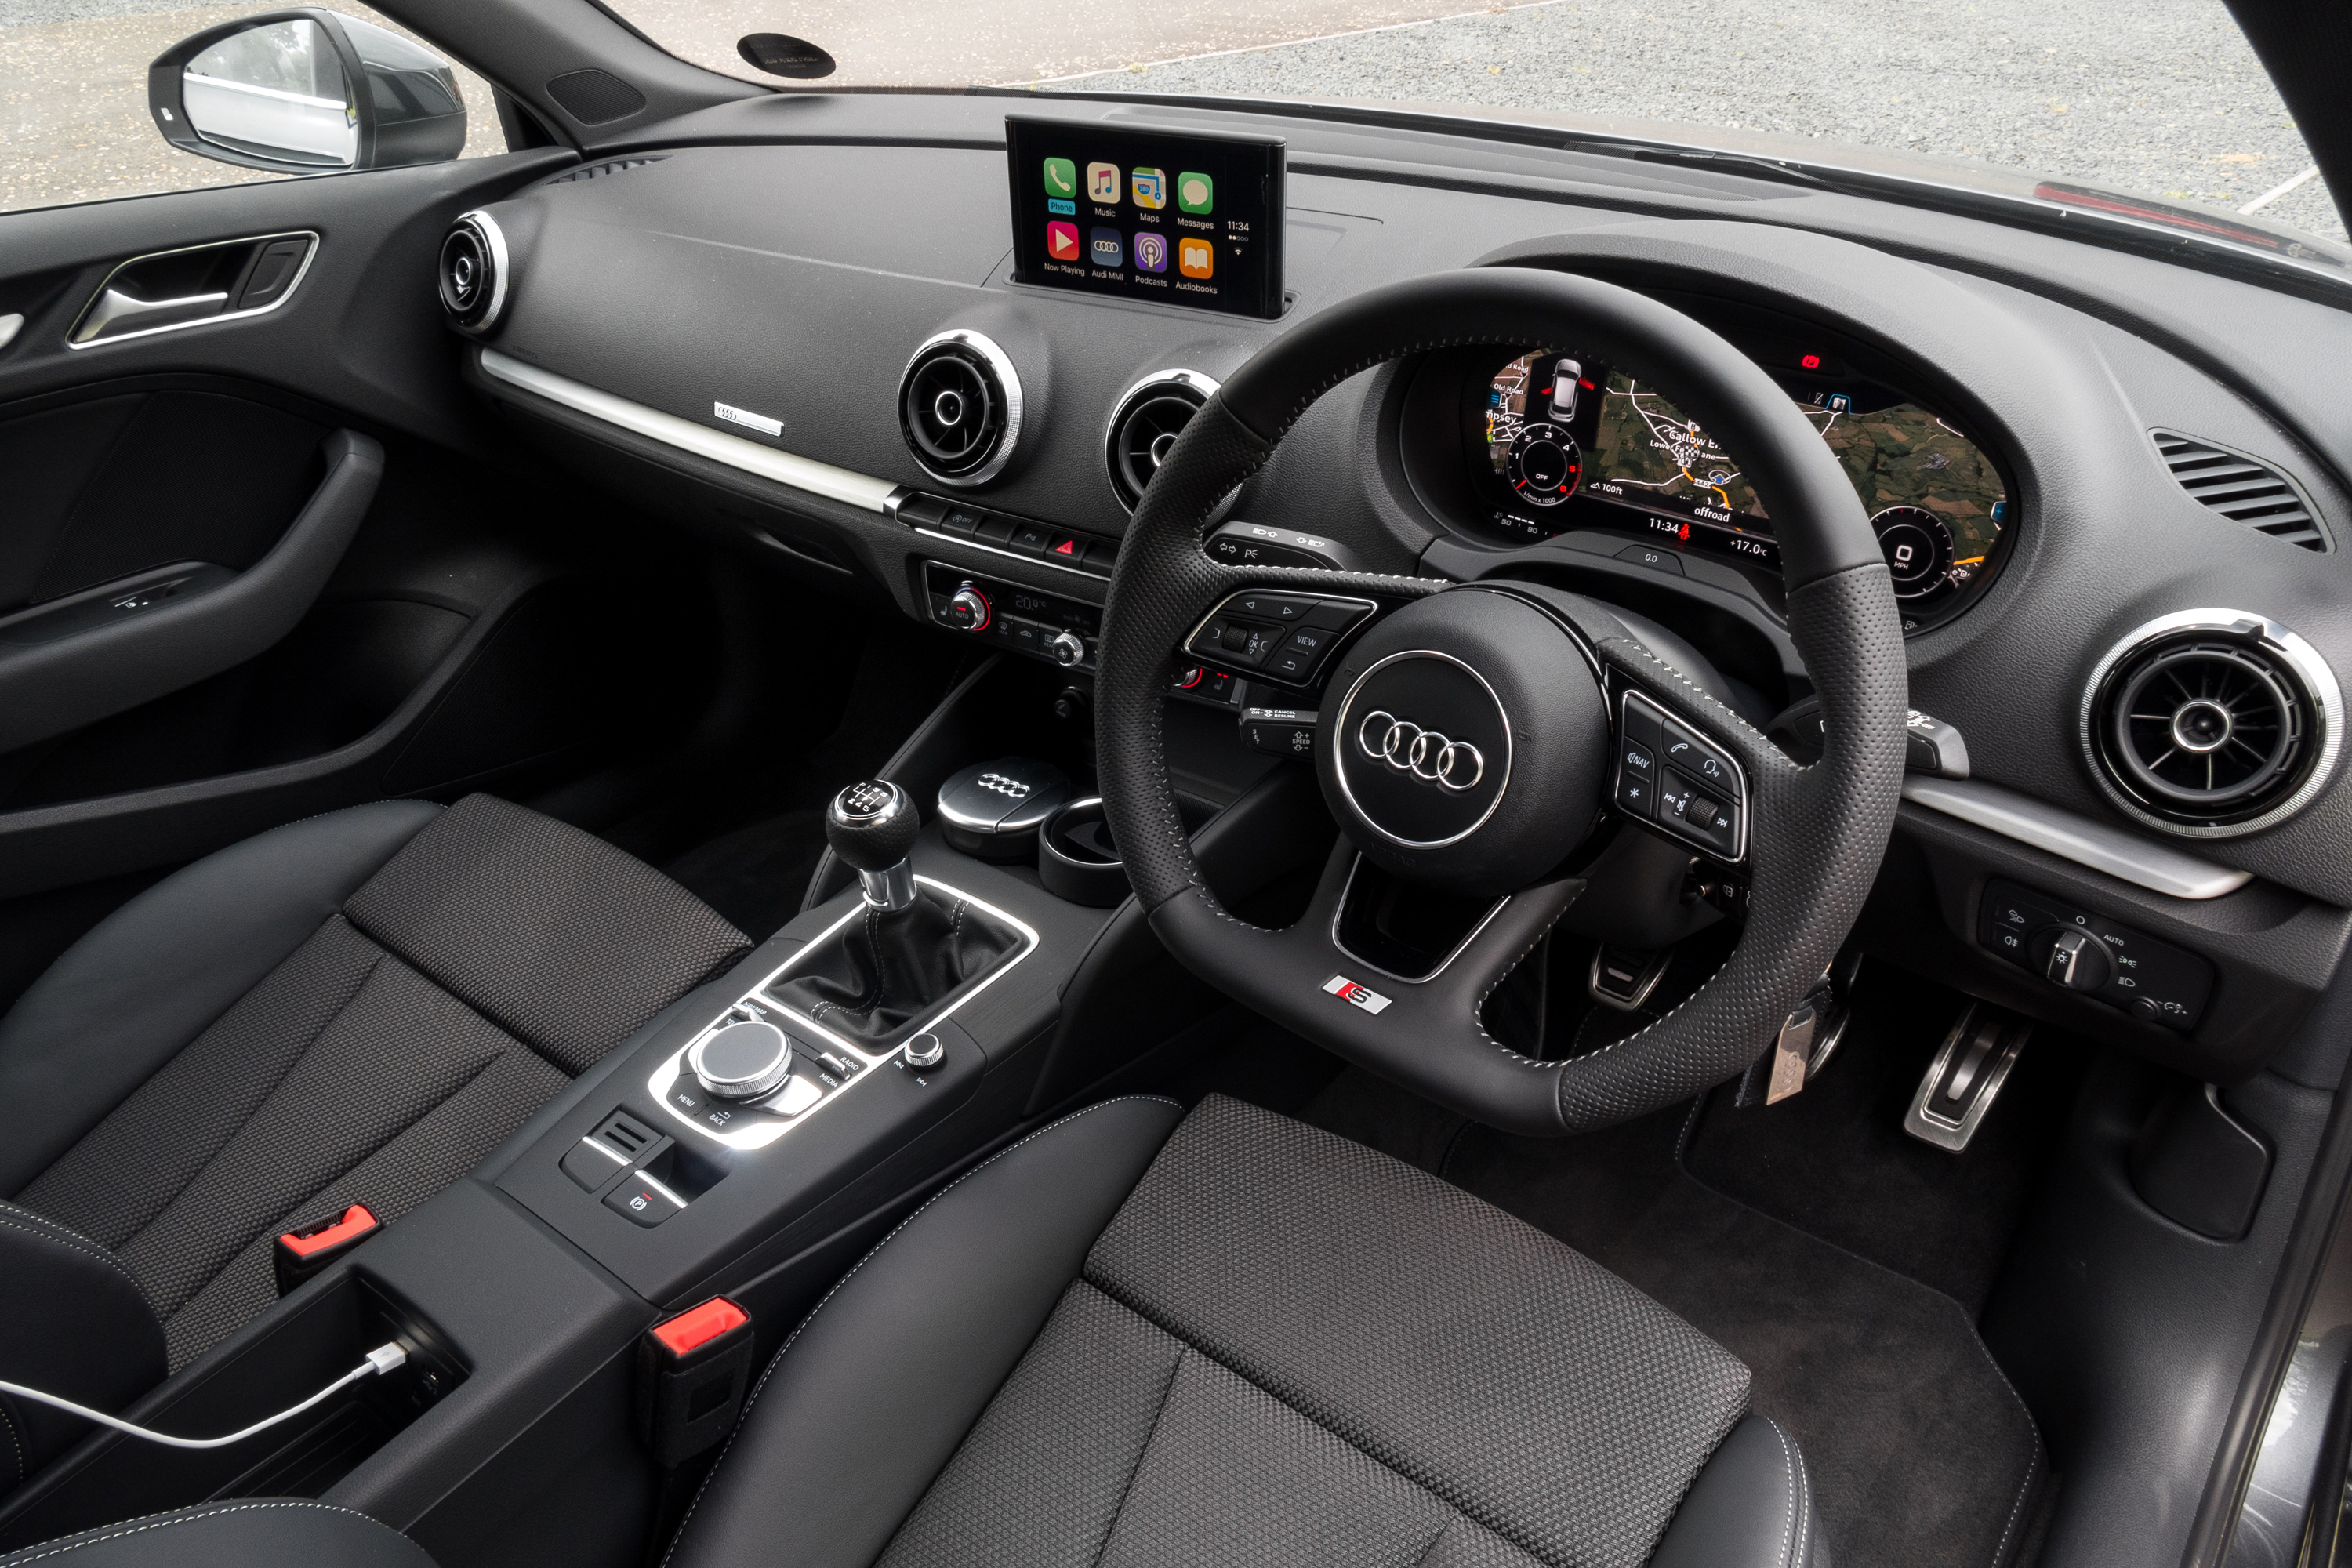 Audi A3 Sportback dimensions and boot space hybrid and thermal